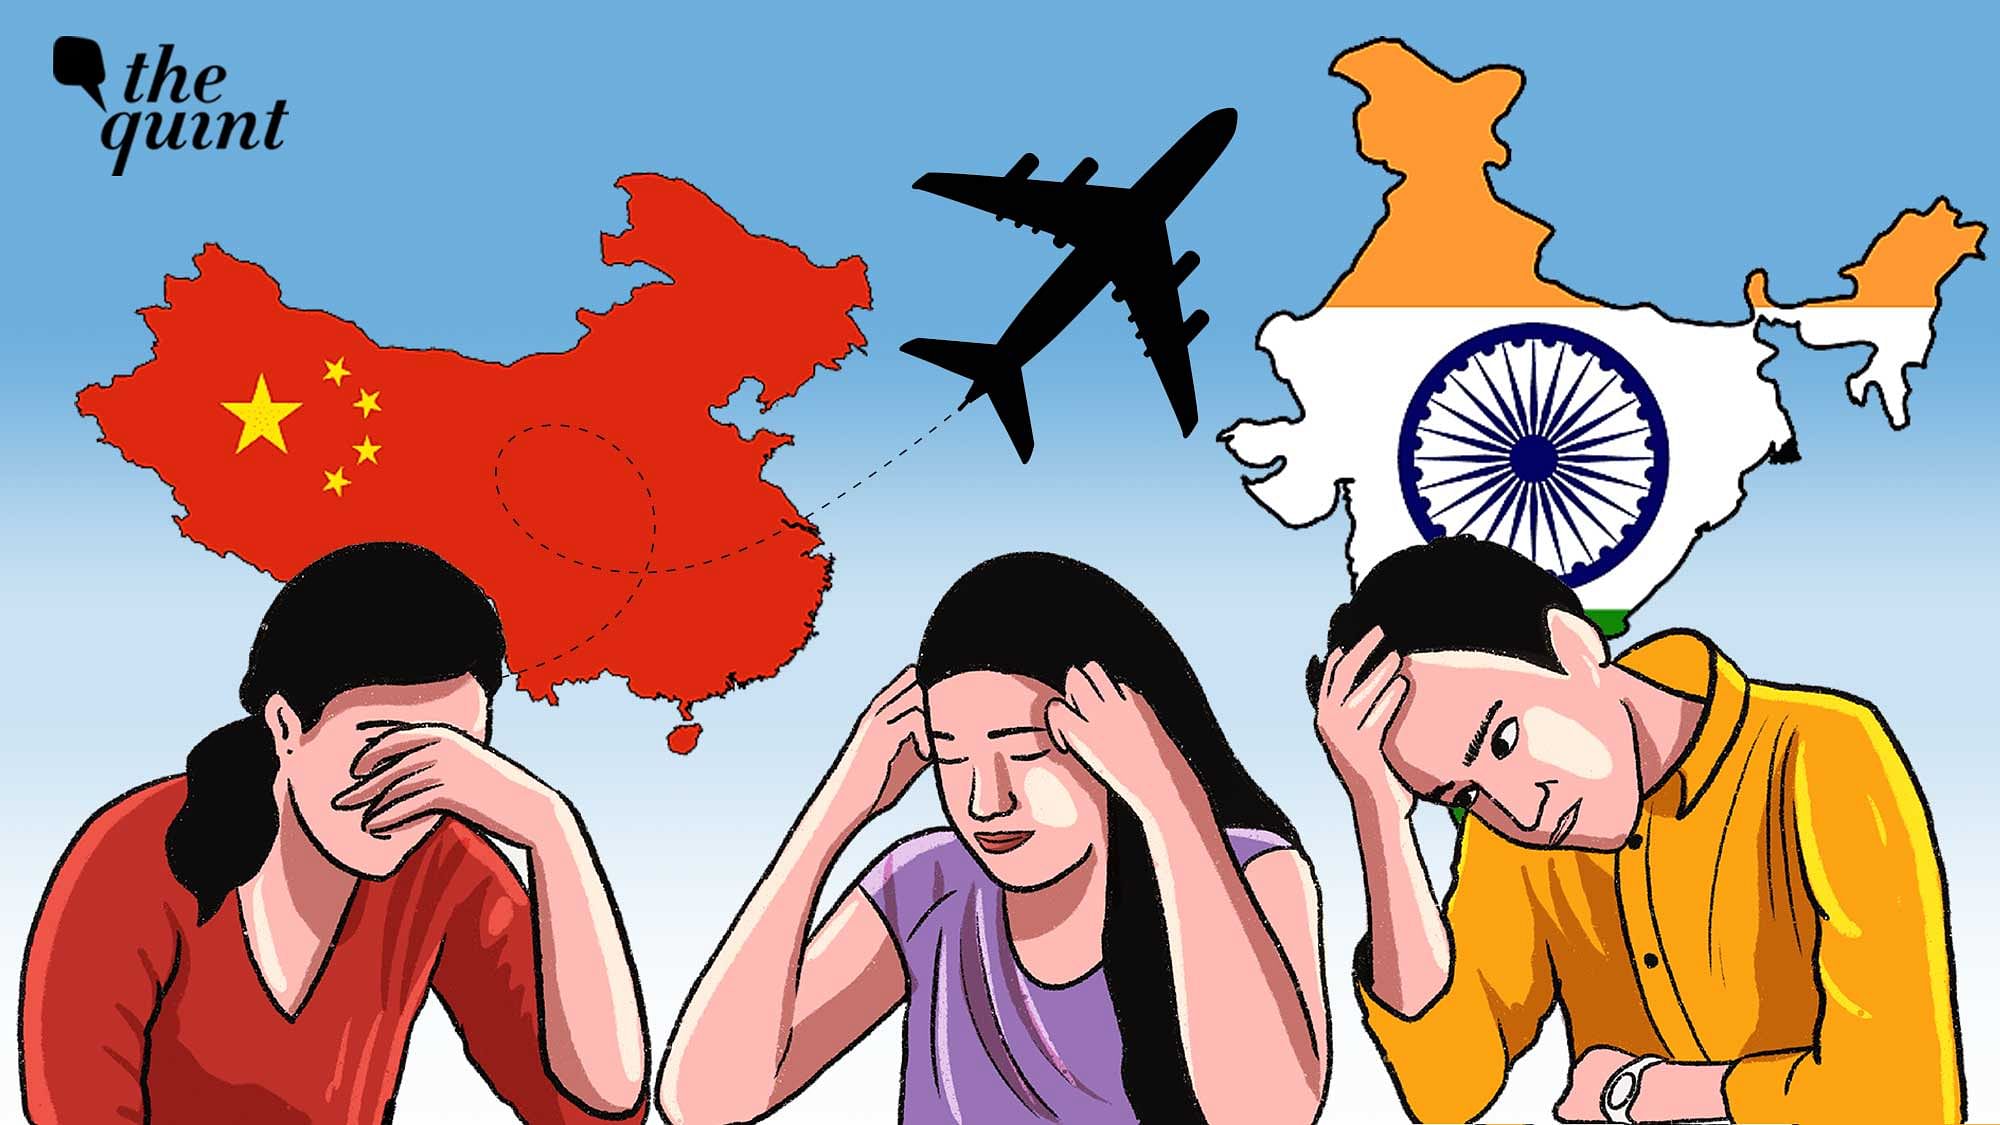 <div class="paragraphs"><p>In November 2020,&nbsp;China&nbsp;banned Indians from traveling to&nbsp;China&nbsp;because of COVID-19.&nbsp;On 22 August&nbsp;this year,&nbsp;China&nbsp;finally&nbsp;announced that Indian students will be able to apply for visas to&nbsp;China.&nbsp;&nbsp;</p></div>